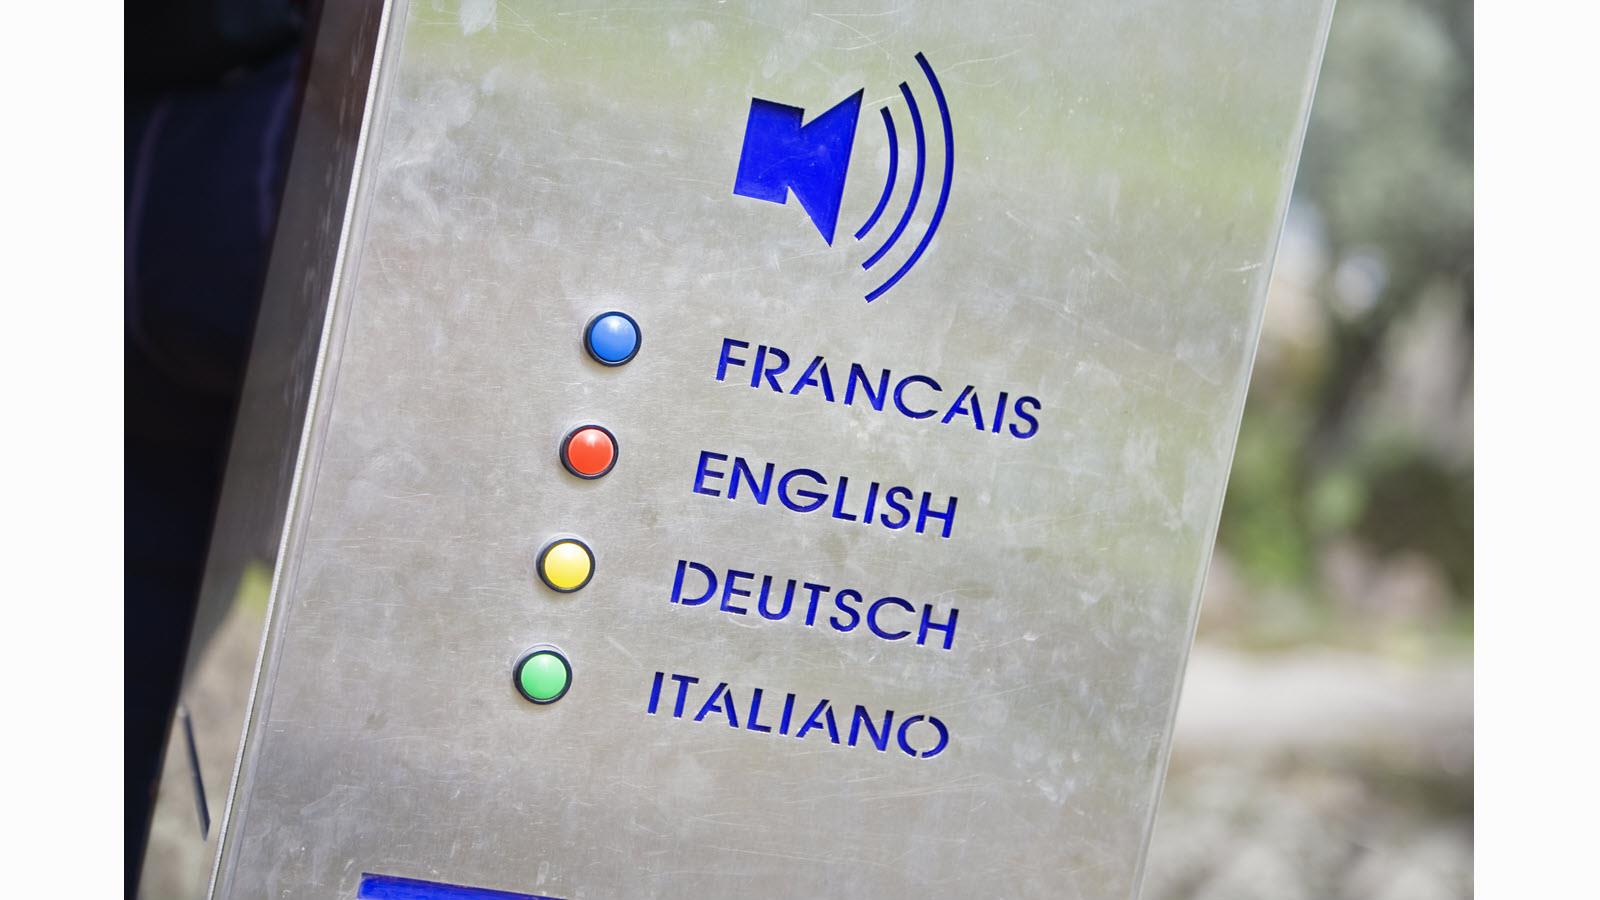 Speaker box with options for French, English, German and Italian